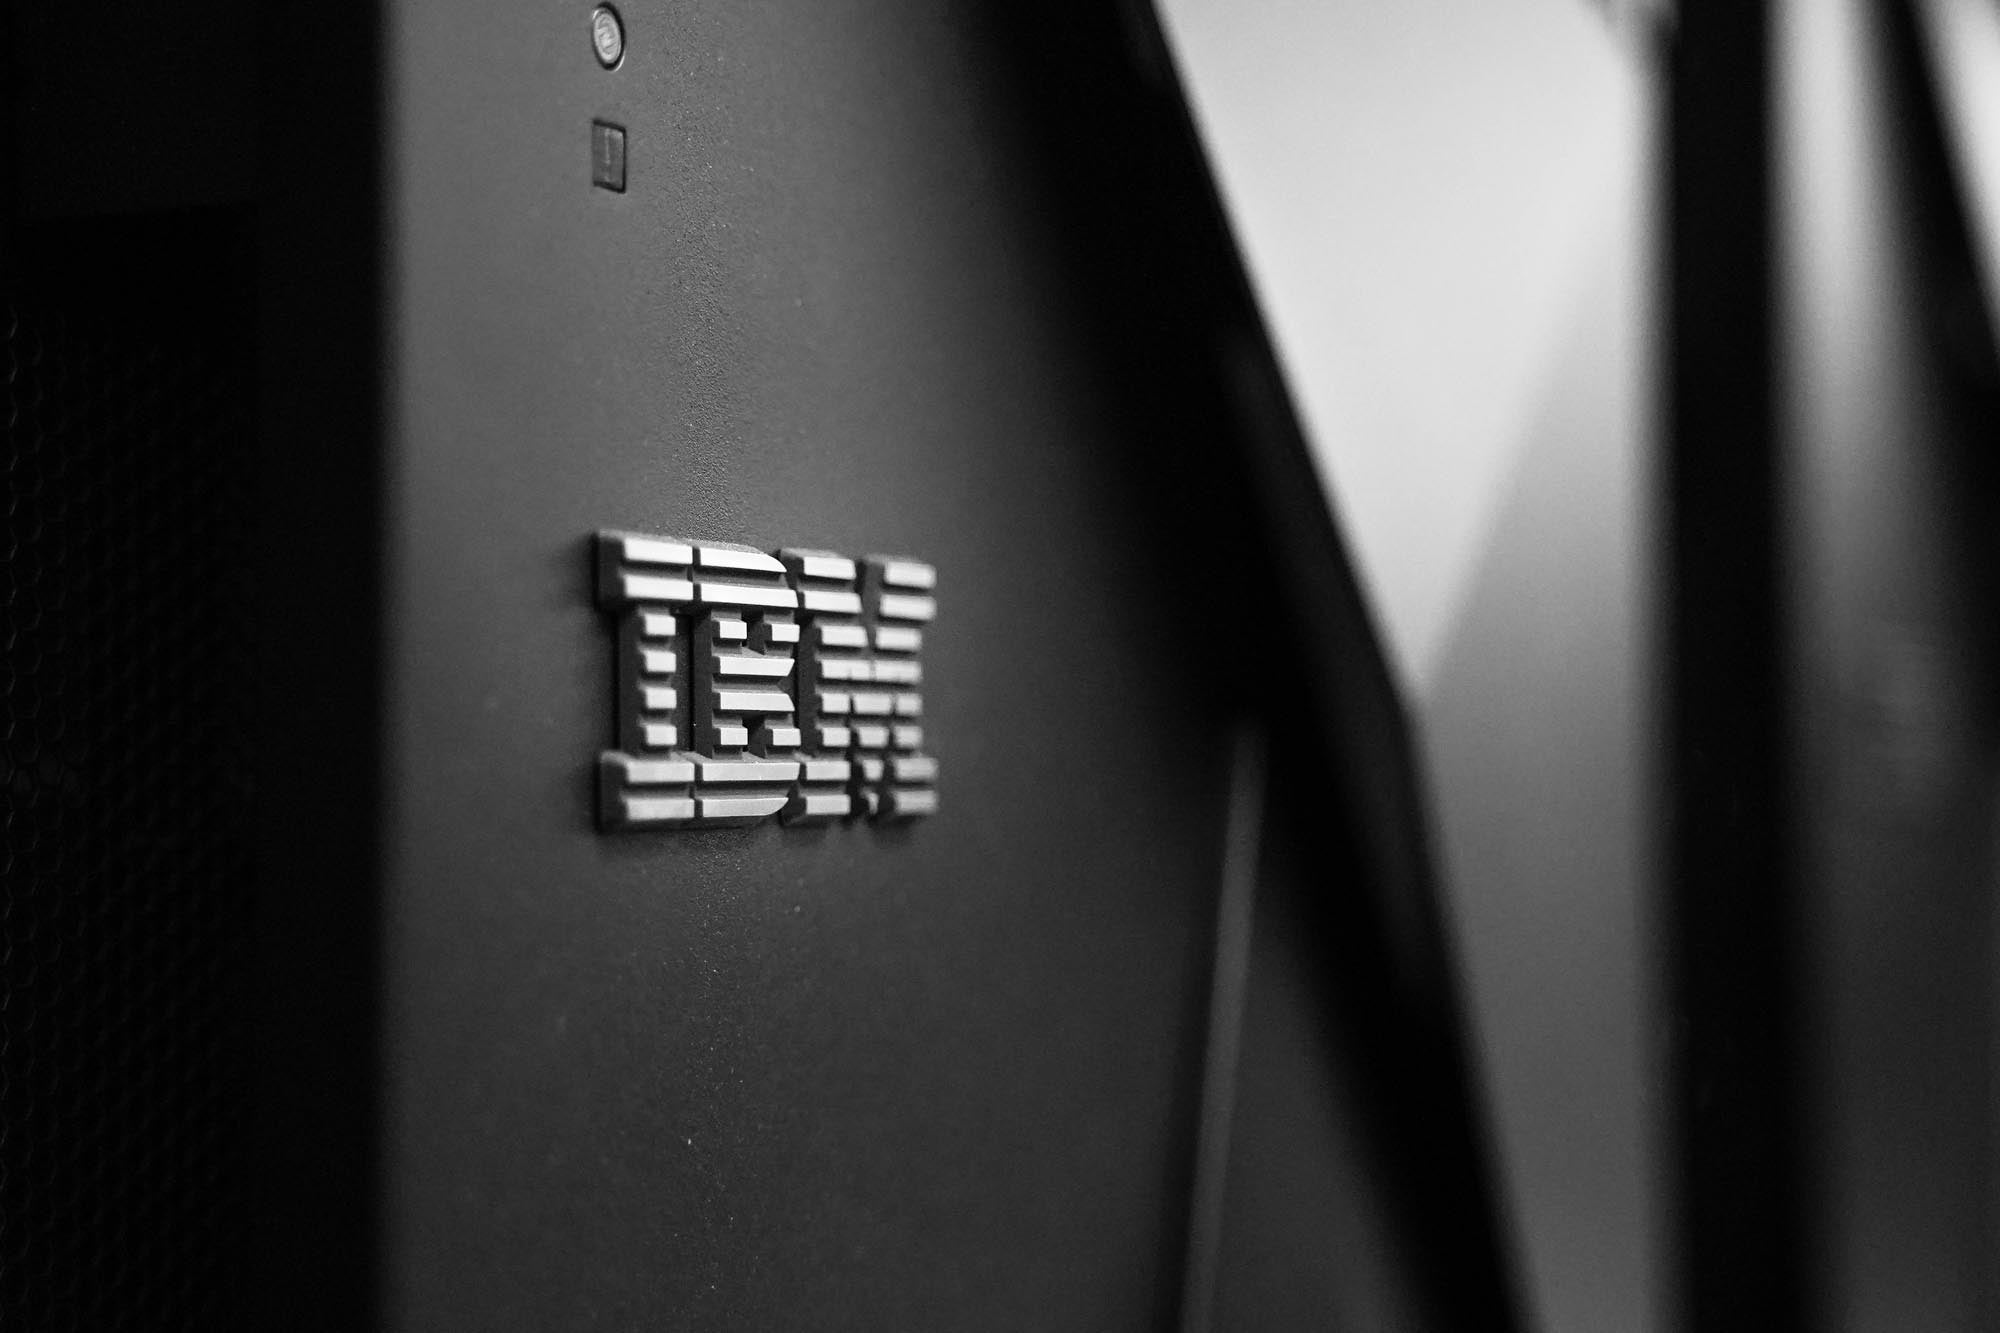 IBM Rejects 0Day Disclosure: Remote Exploit Gives Root, No Patch Yet